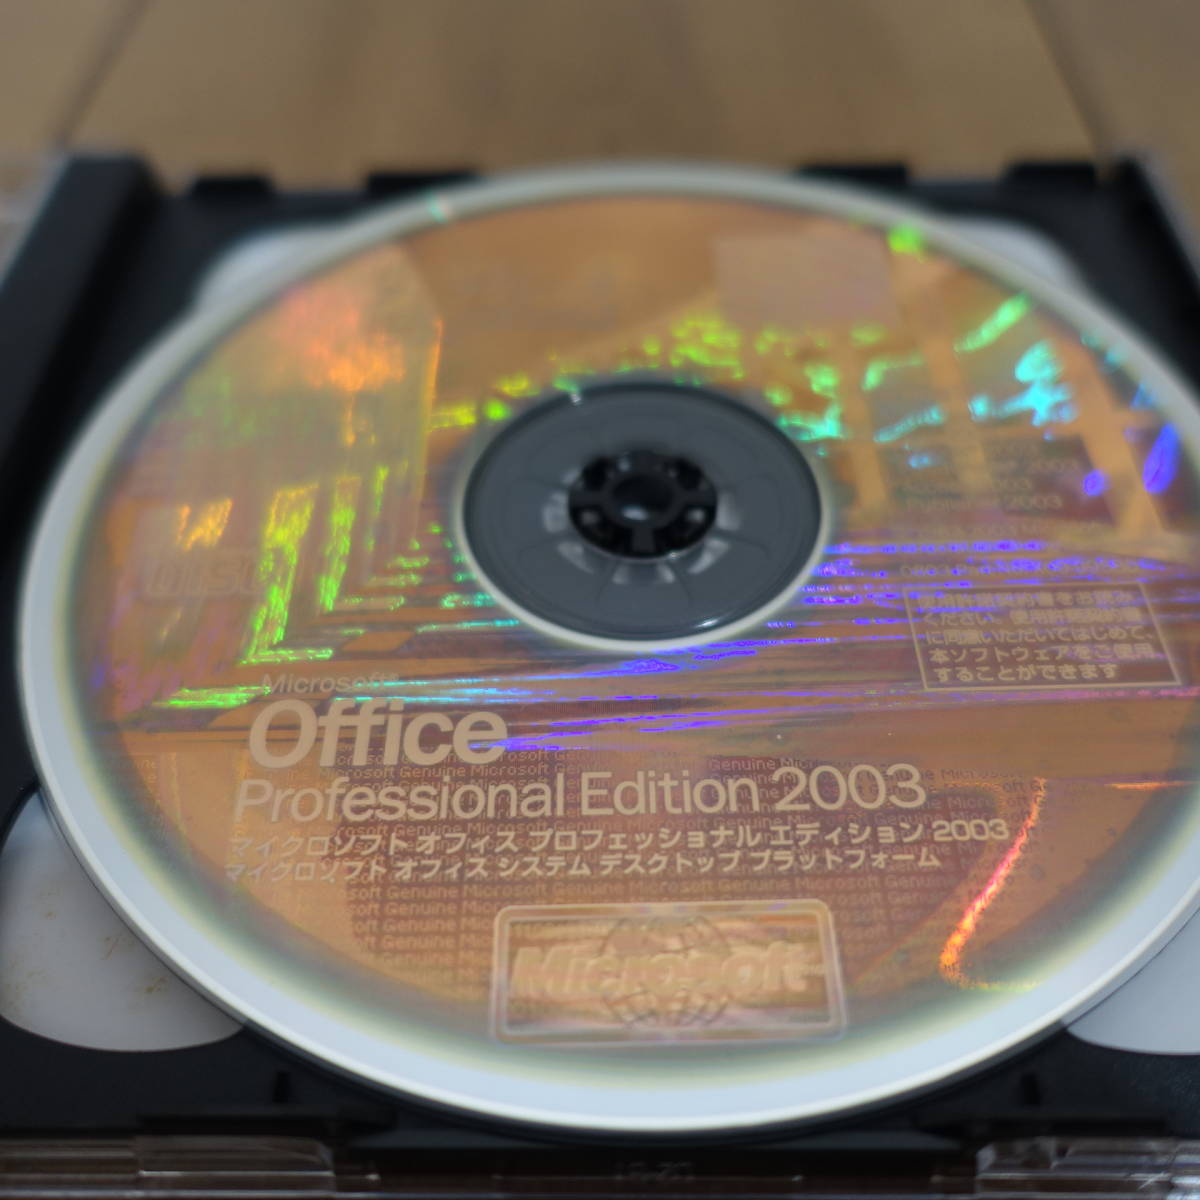 Microsoft Office Professional Edition 2003 Word/Excel/PowerPoint/Access/Publisher/Outlook アップグレード_画像2